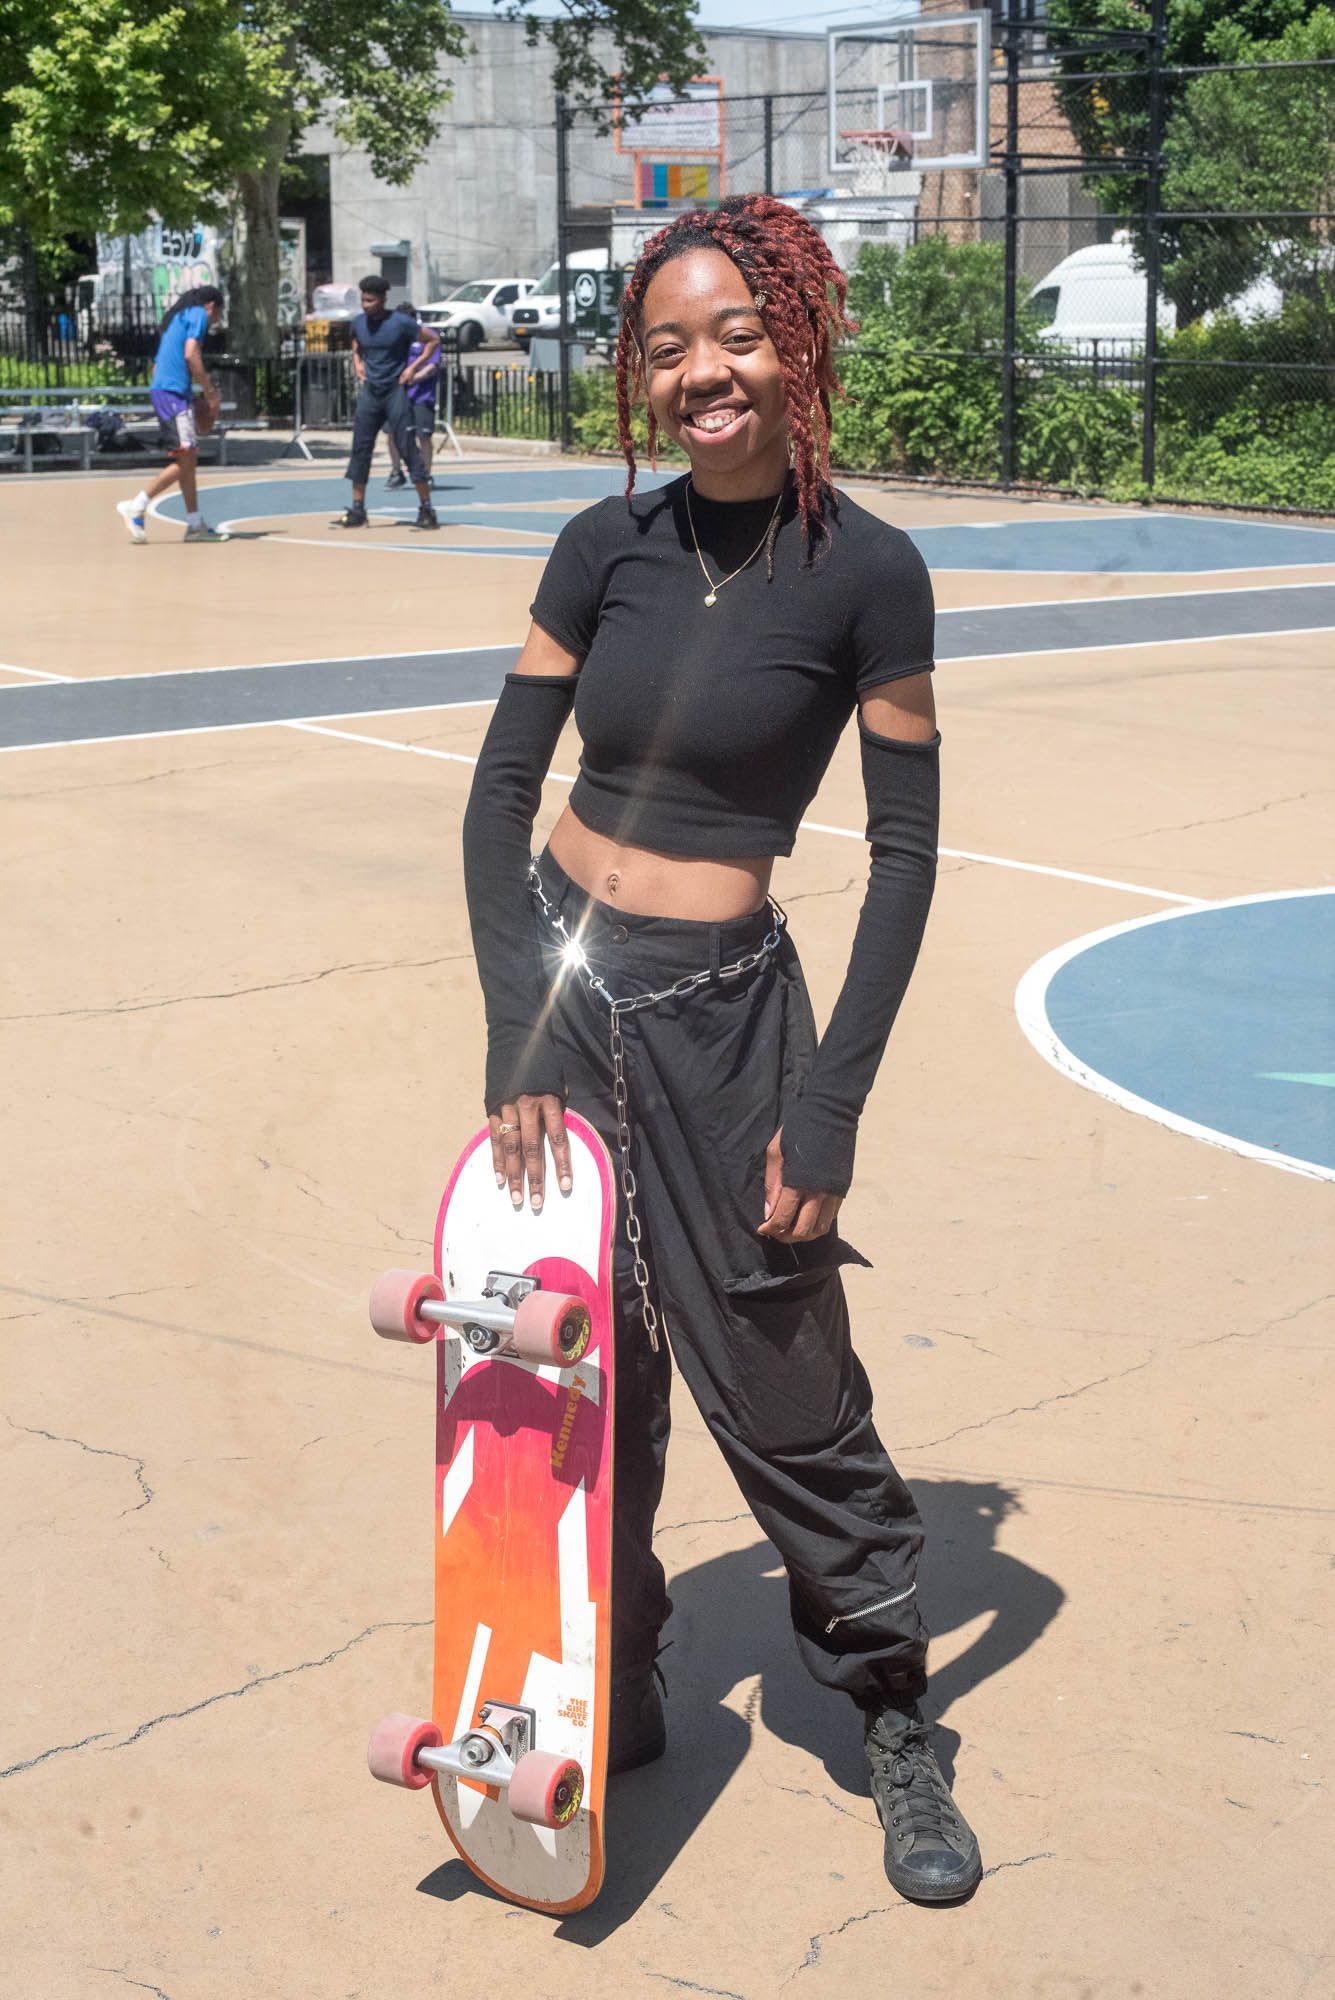 Vision-Skye with red braids, wearing all black next to a pink and orange skateboard. Her chain glistens in the sun as she smiles at the camera.